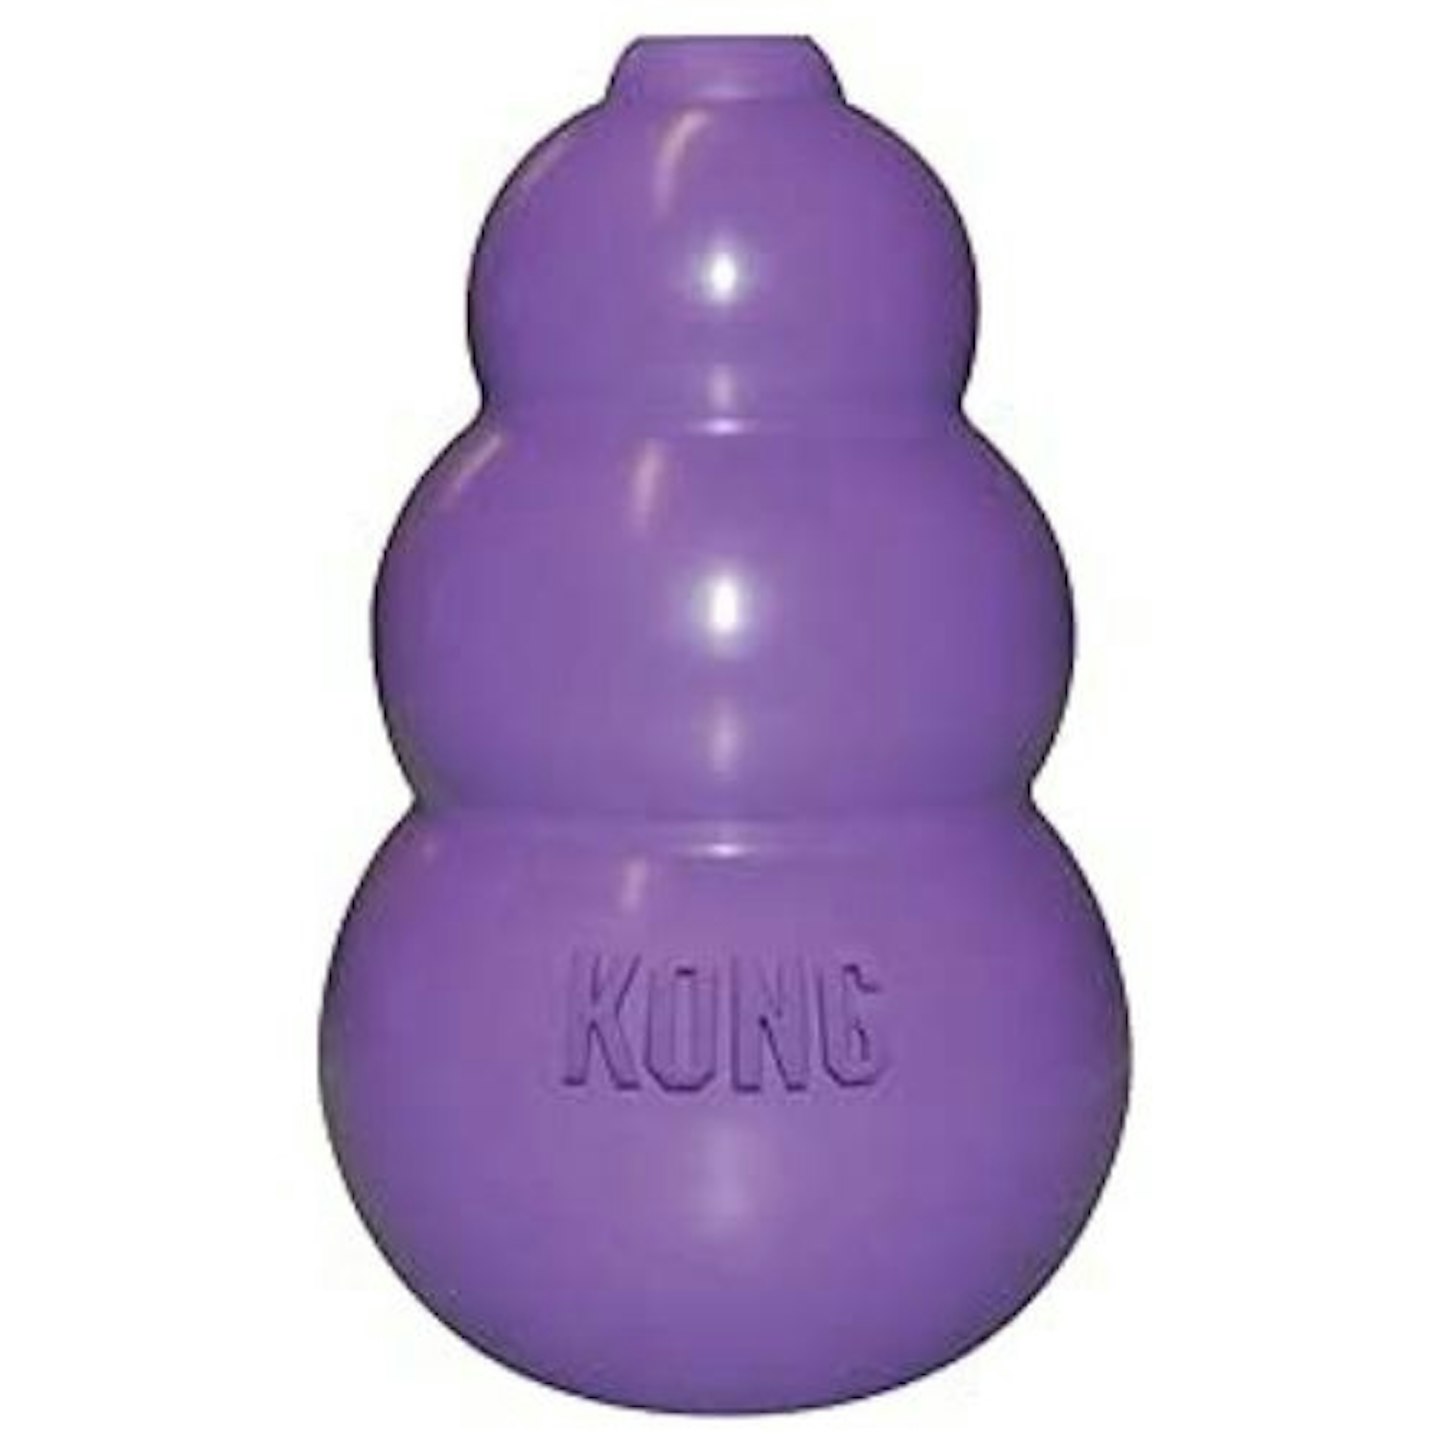 Kitty KONG Durable Natural Rubber Cat Toy